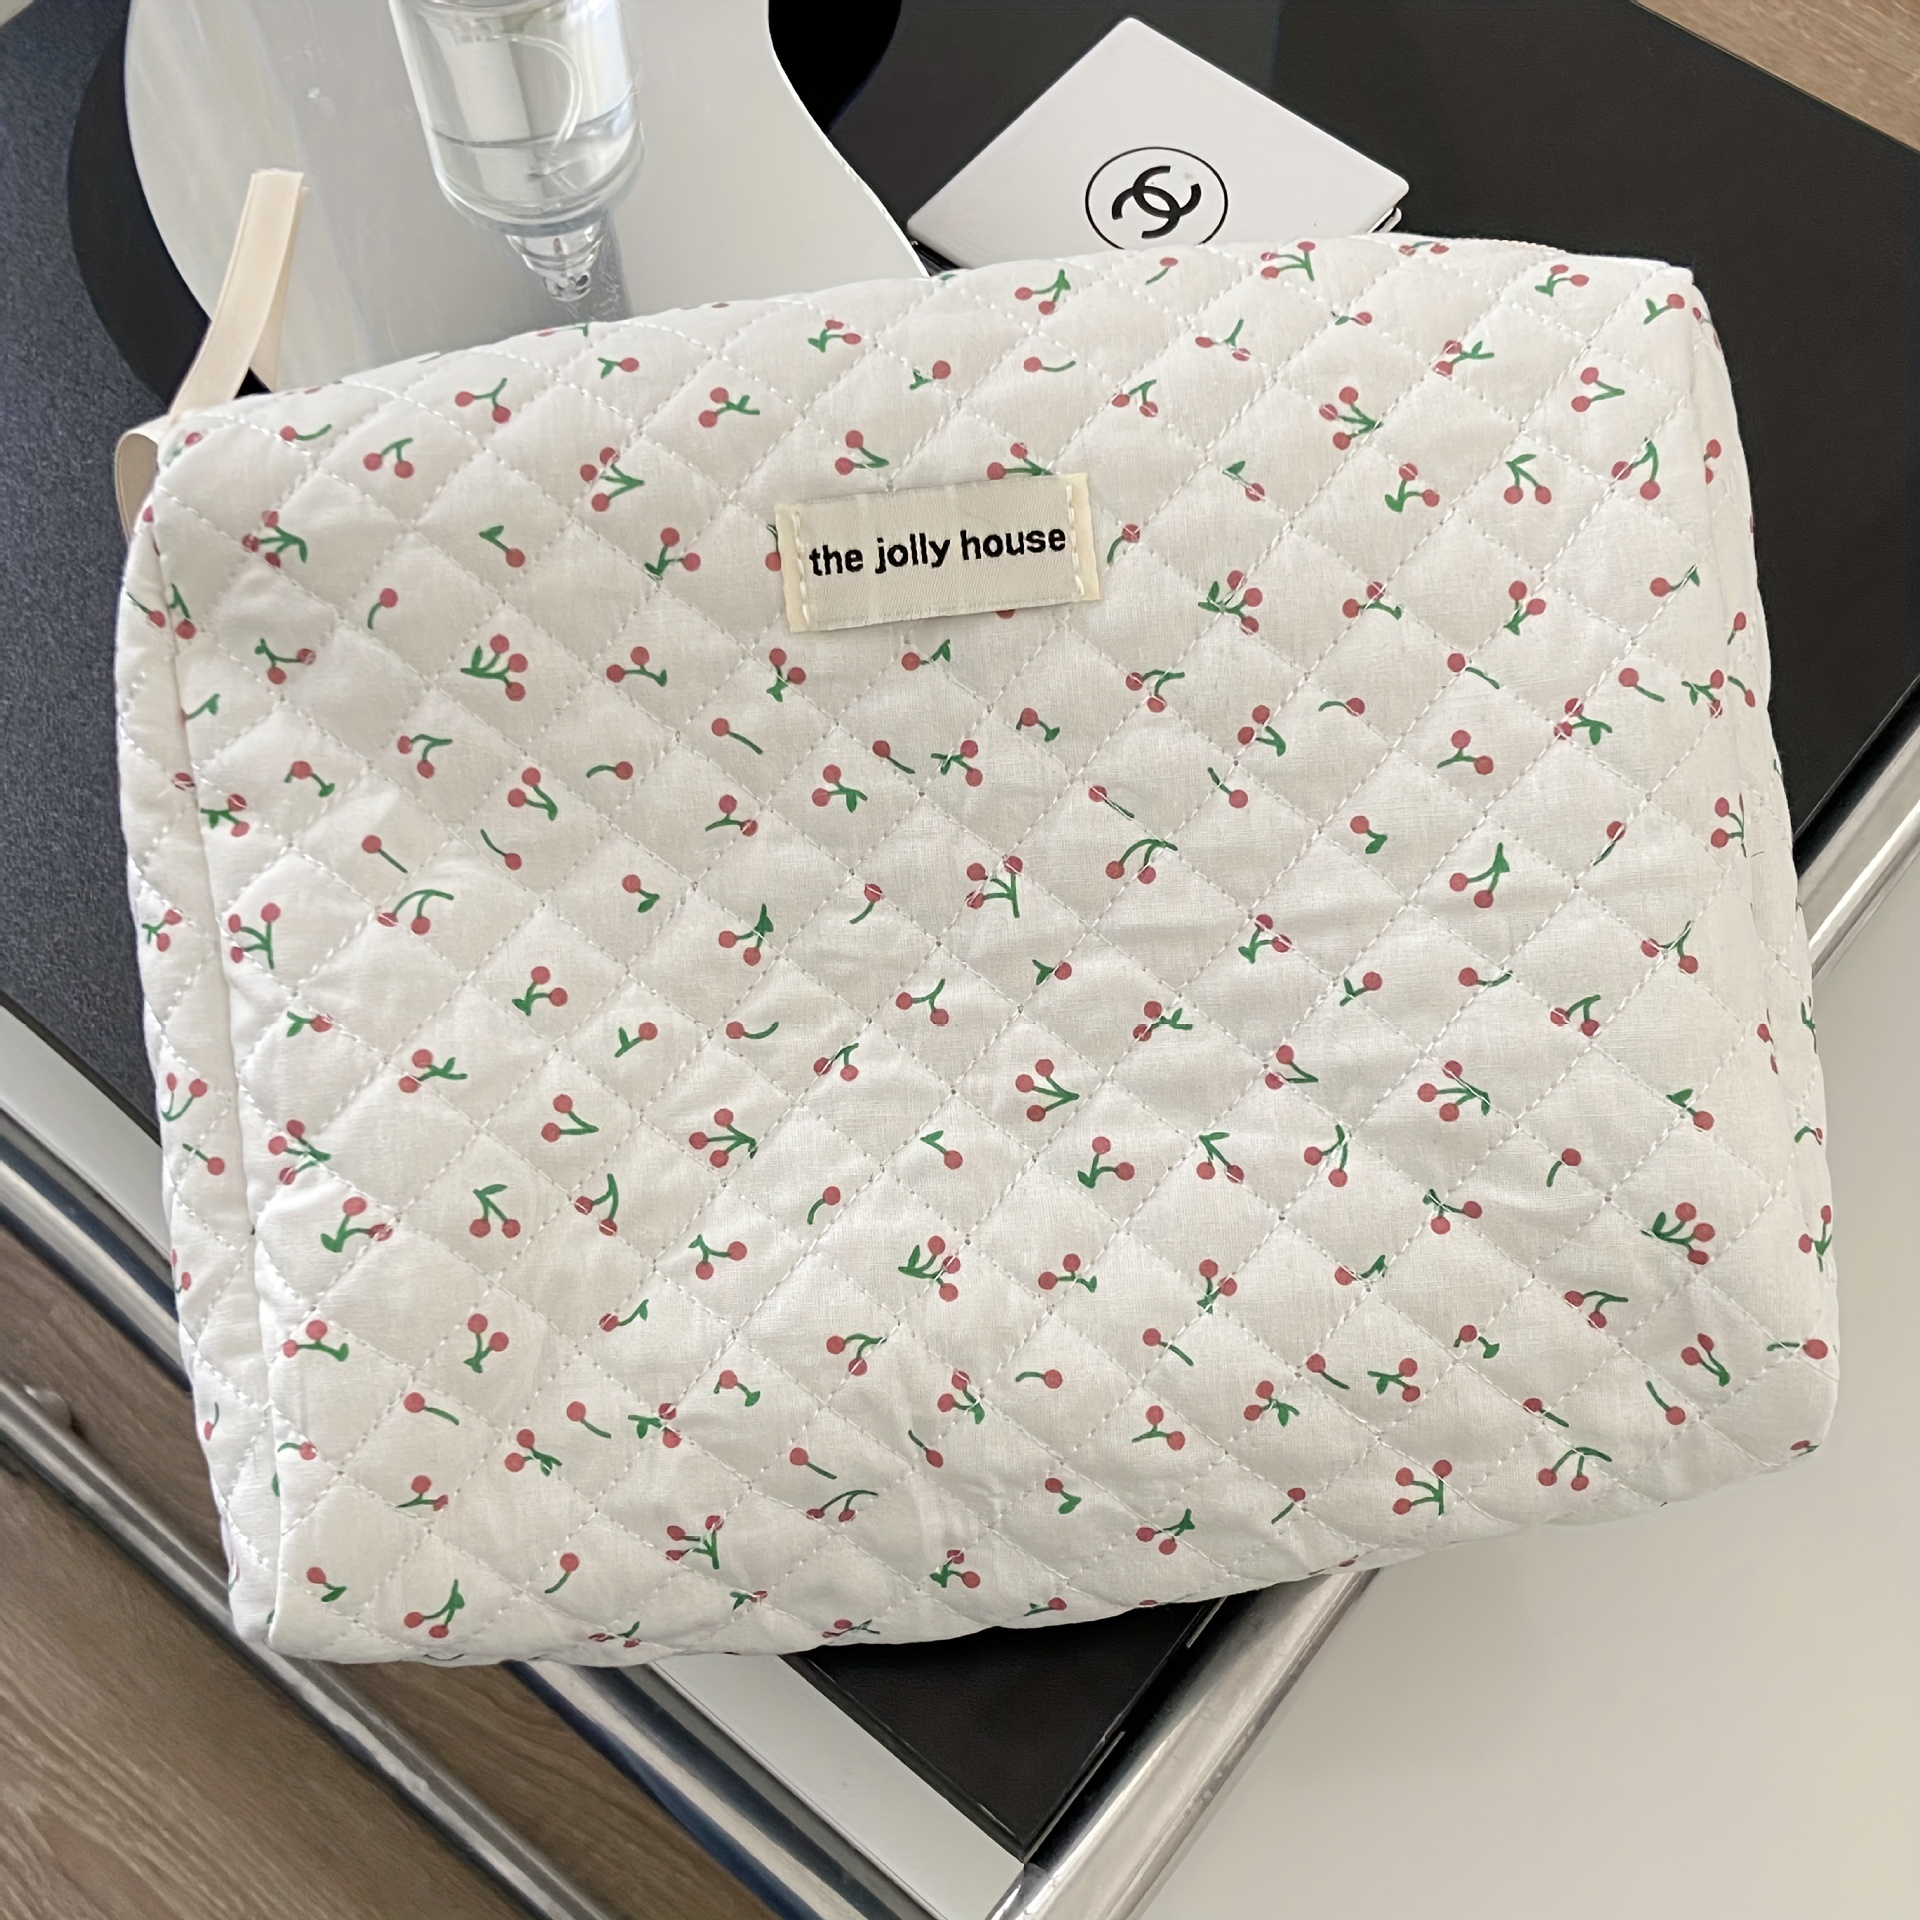 1Pc Cotton Makeup Bag Large Travel Cosmetic Pouch Toiletry Bag Cute Cherry  Pattern Makeup Bag White